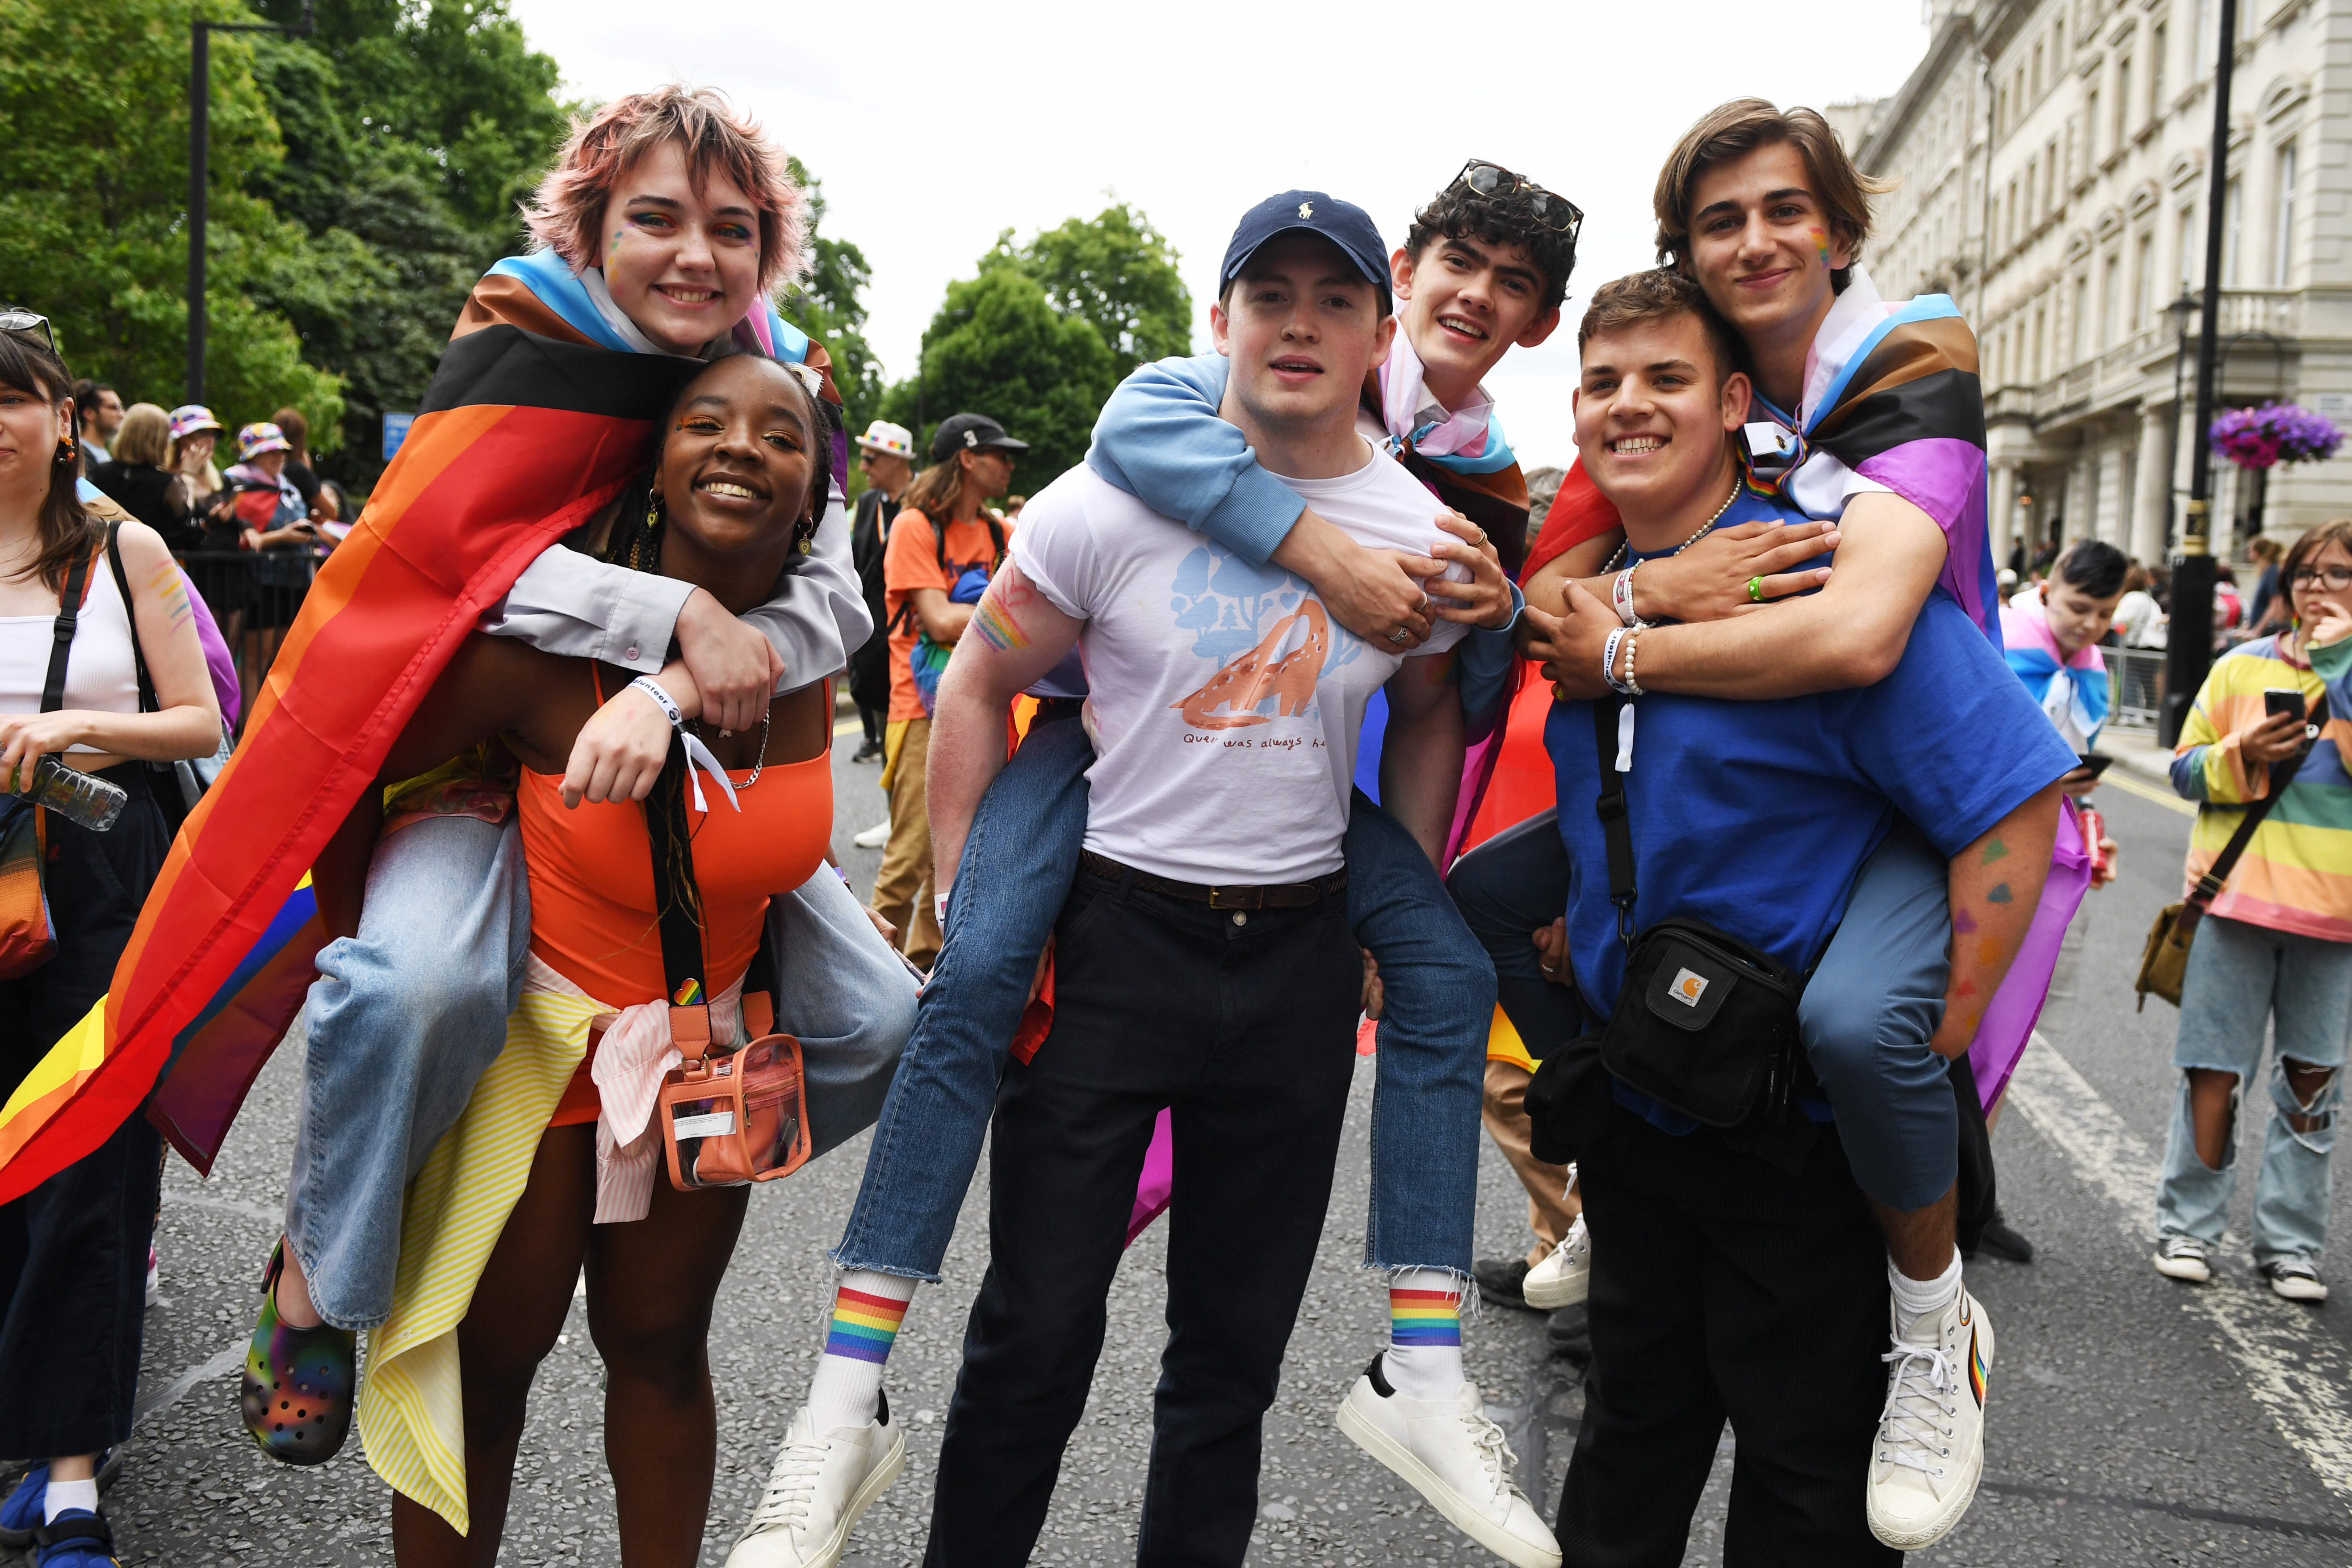 The cast of "Heartstopper" (L-R) Kizzy Edgell, Corinna Brown, Kit Connor, Joe Locke, Tobie Donovan and Sebastian Croft attend Pride in London 2022: The 50th Anniversary - Parade on July 02, 2022 in London, England. | Source: Getty Images